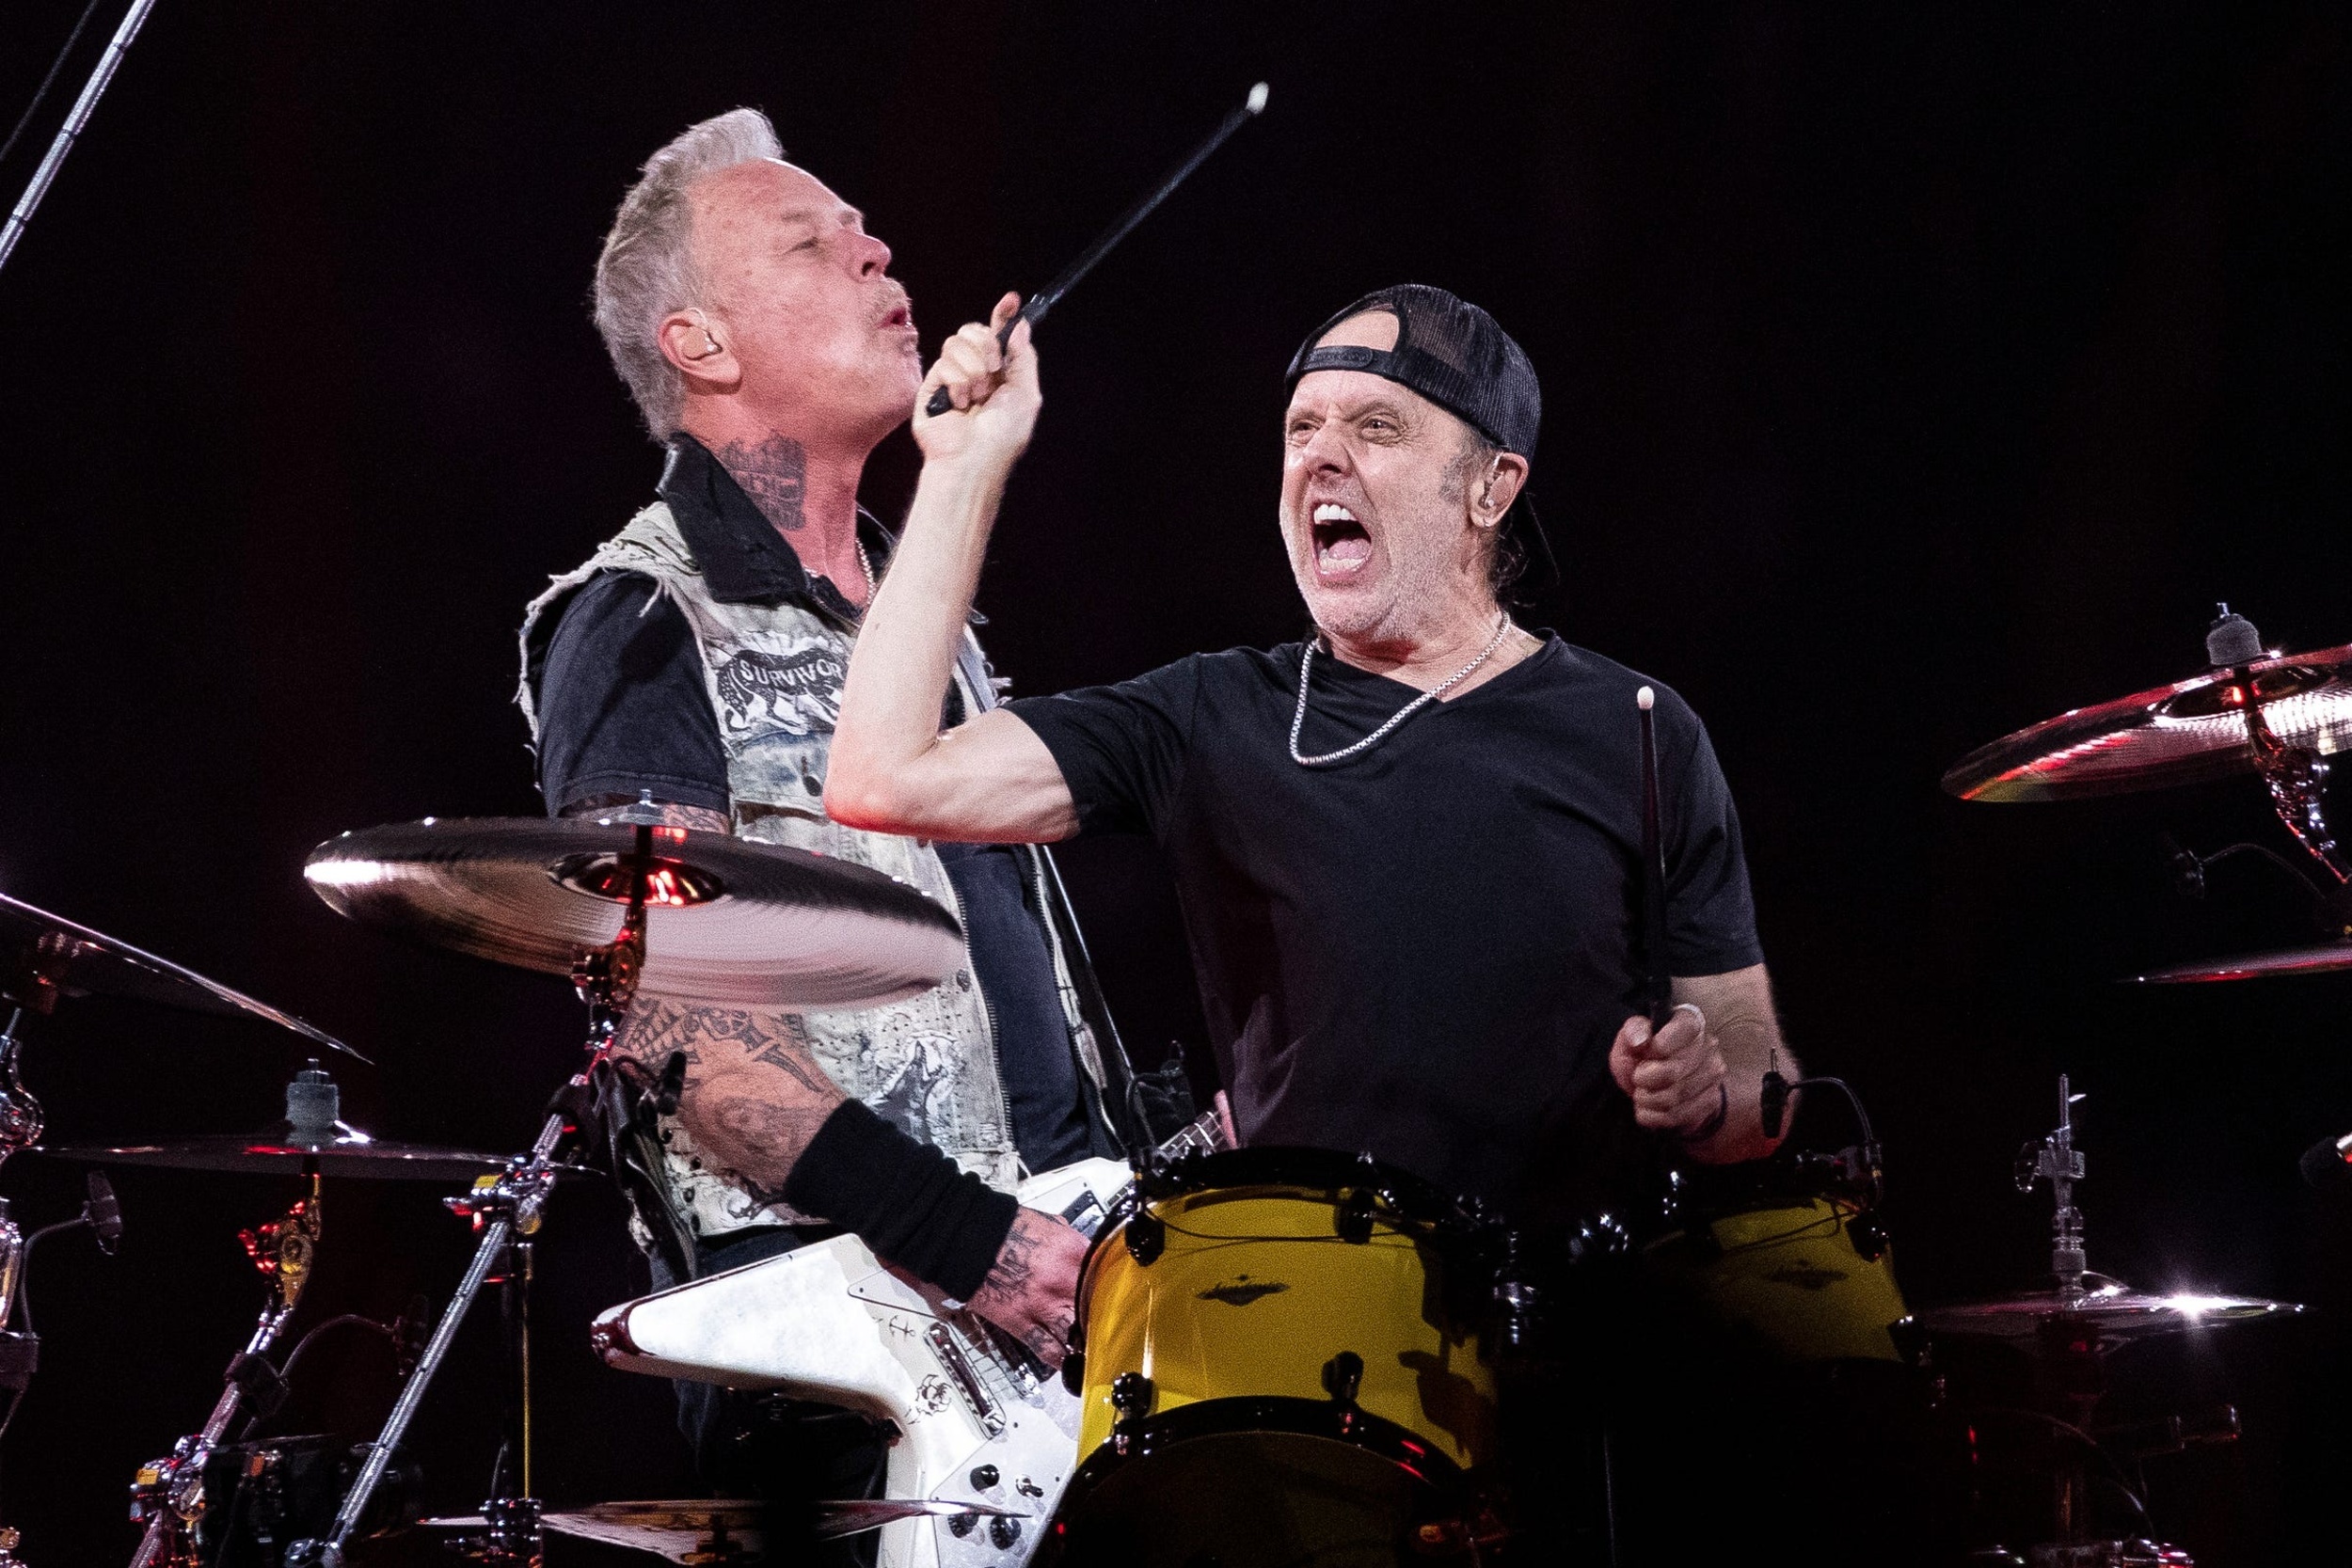 <p>Metallica's <a href="https://www.youtube.com/watch?v=1OeC9CGtWcM">72 Seasons </a>was released in April 2023 to much fanfare, and the "M72 World Tour," which featured two nights of non-repeat setlists, kicked off shortly after and spanned Europe and North America. Now, the 2024 leg of the tour gets going in May, in Europe. It then will begin a North American run on Aug. 2 in Foxborough, Mass. Mammoth WVH, Pantera, Volbeat, Greta Van Fleet and Five Finger Death Punch have, and will continue to serve, as opening acts for Metallica. While Metallica can no longer deliver blistering 2.5- to 3-hour sets, the variety of the setlists spanning two nights makes up.</p><p><a href='https://www.msn.com/en-us/community/channel/vid-cj9pqbr0vn9in2b6ddcd8sfgpfq6x6utp44fssrv6mc2gtybw0us'>Follow us on MSN to see more of our exclusive entertainment content.</a></p>